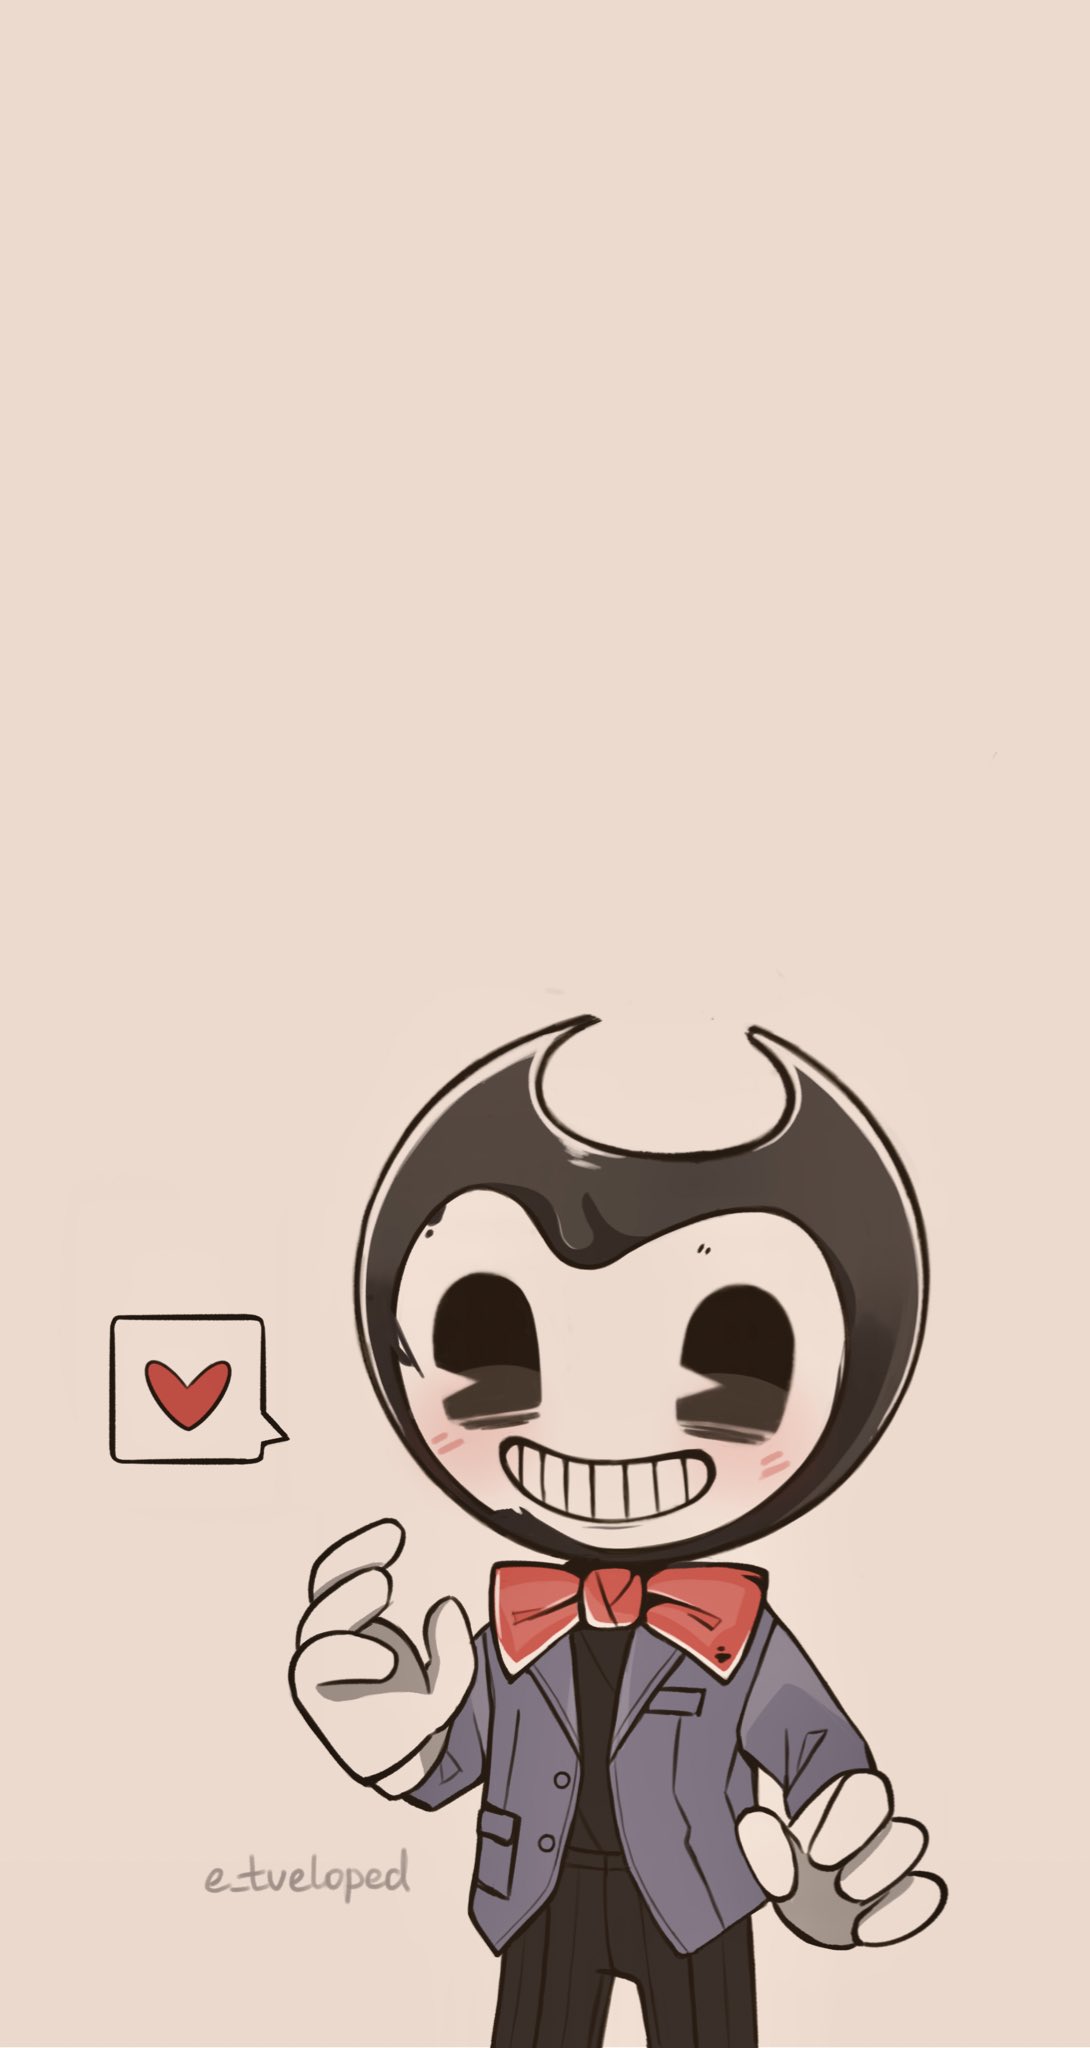 theMeatly Maybe someone needs this wallpaper #bendy #batdr